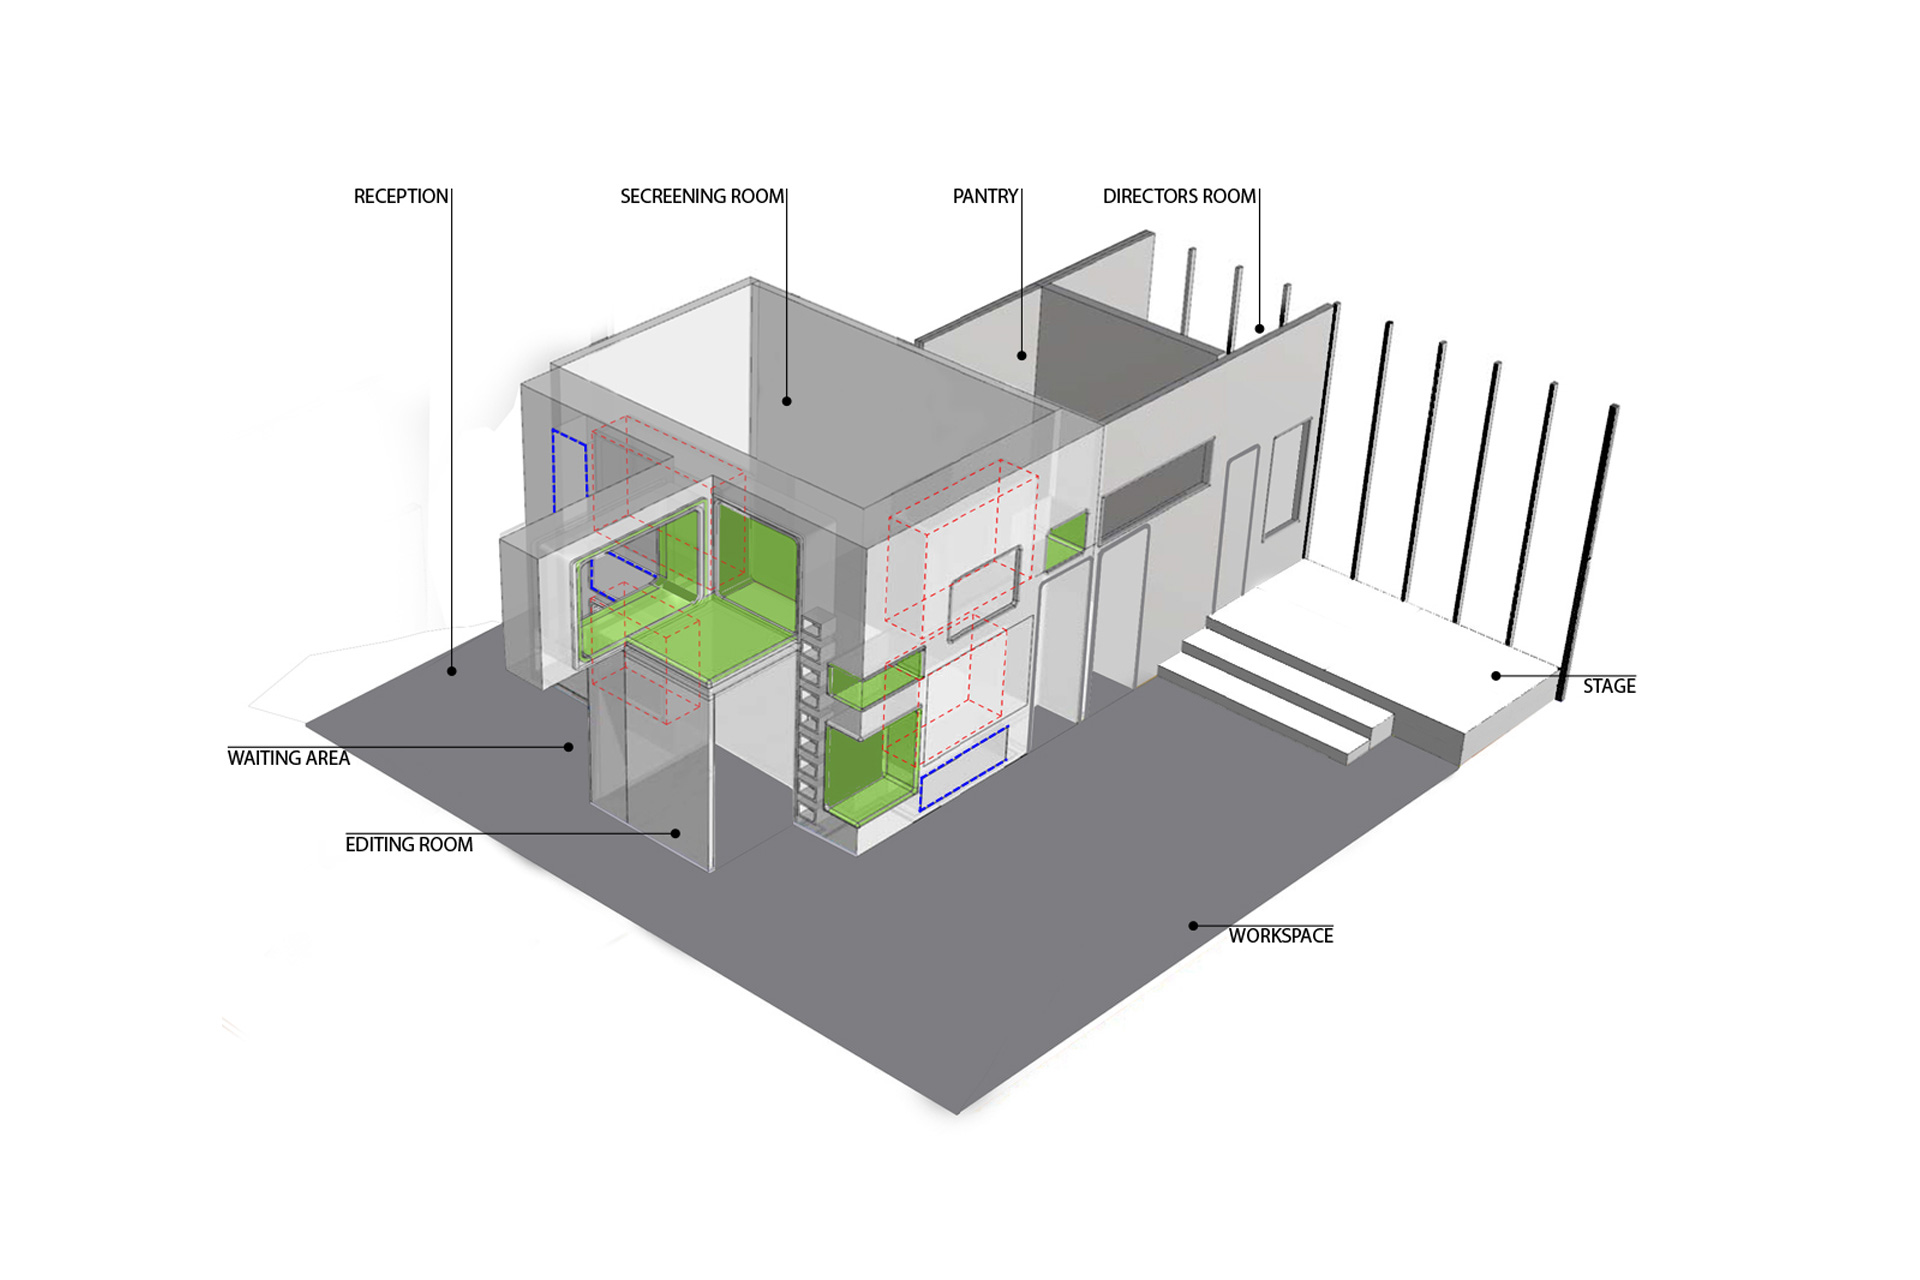 Axonometric view of the office space.